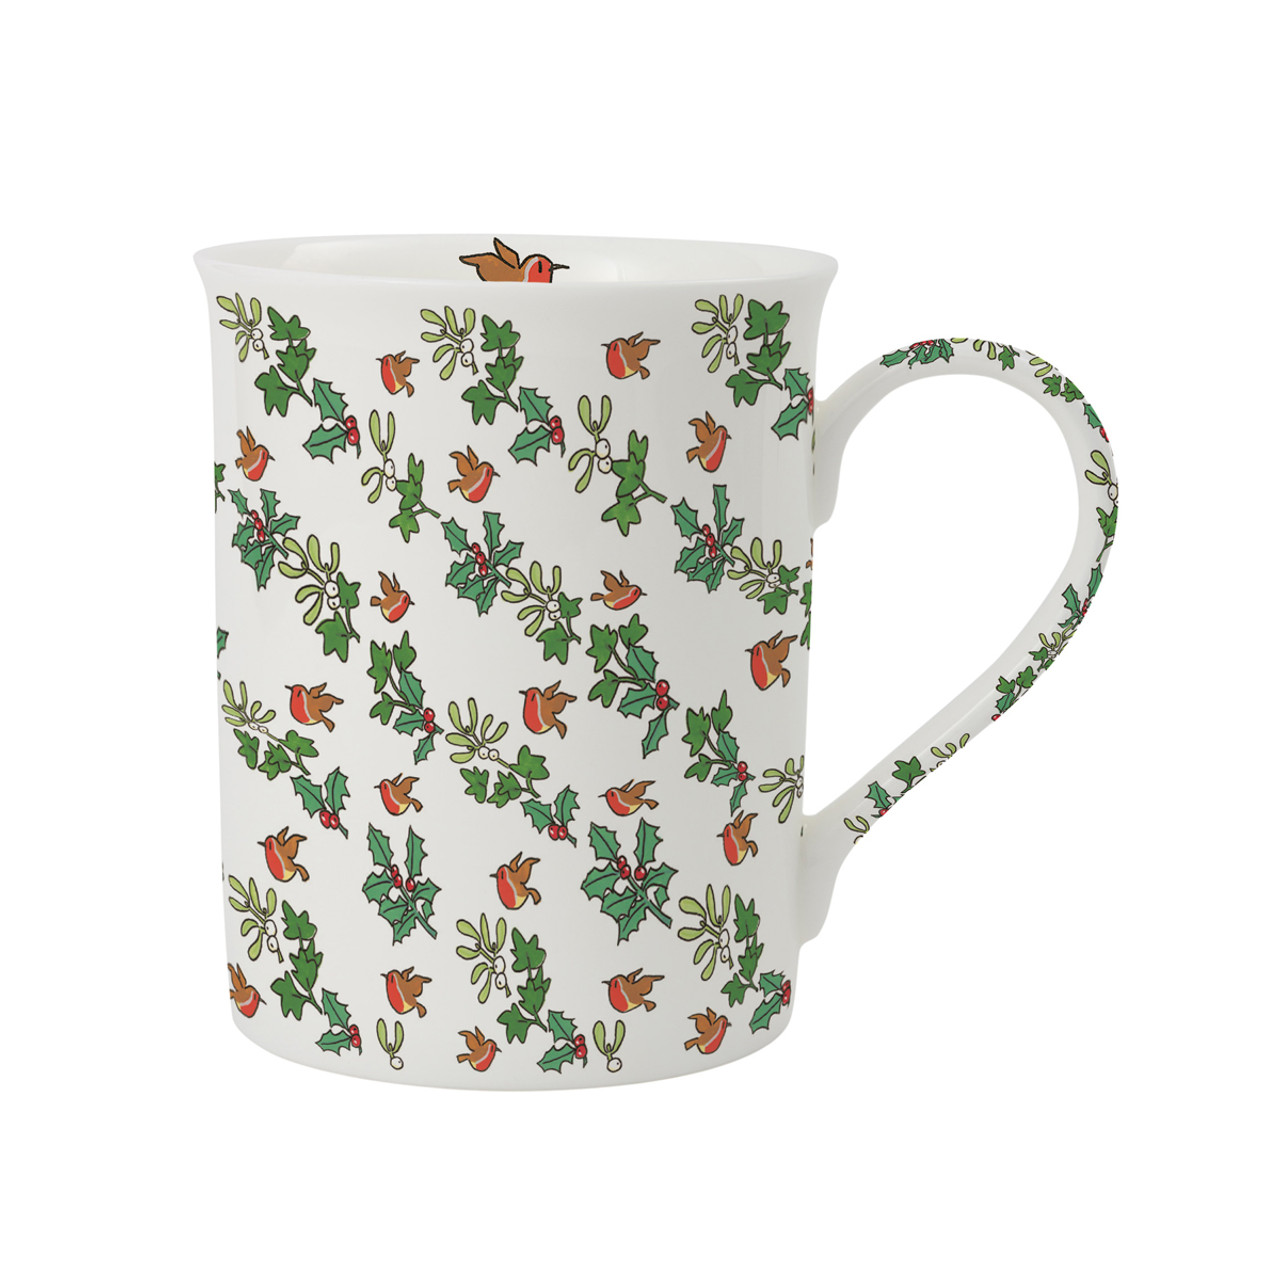 https://cdn11.bigcommerce.com/s-gblv2ntx1h/images/stencil/1280x1280/products/7040/21066/holly-and-ivy-mug-MC03__96643.1693829174.jpg?c=2